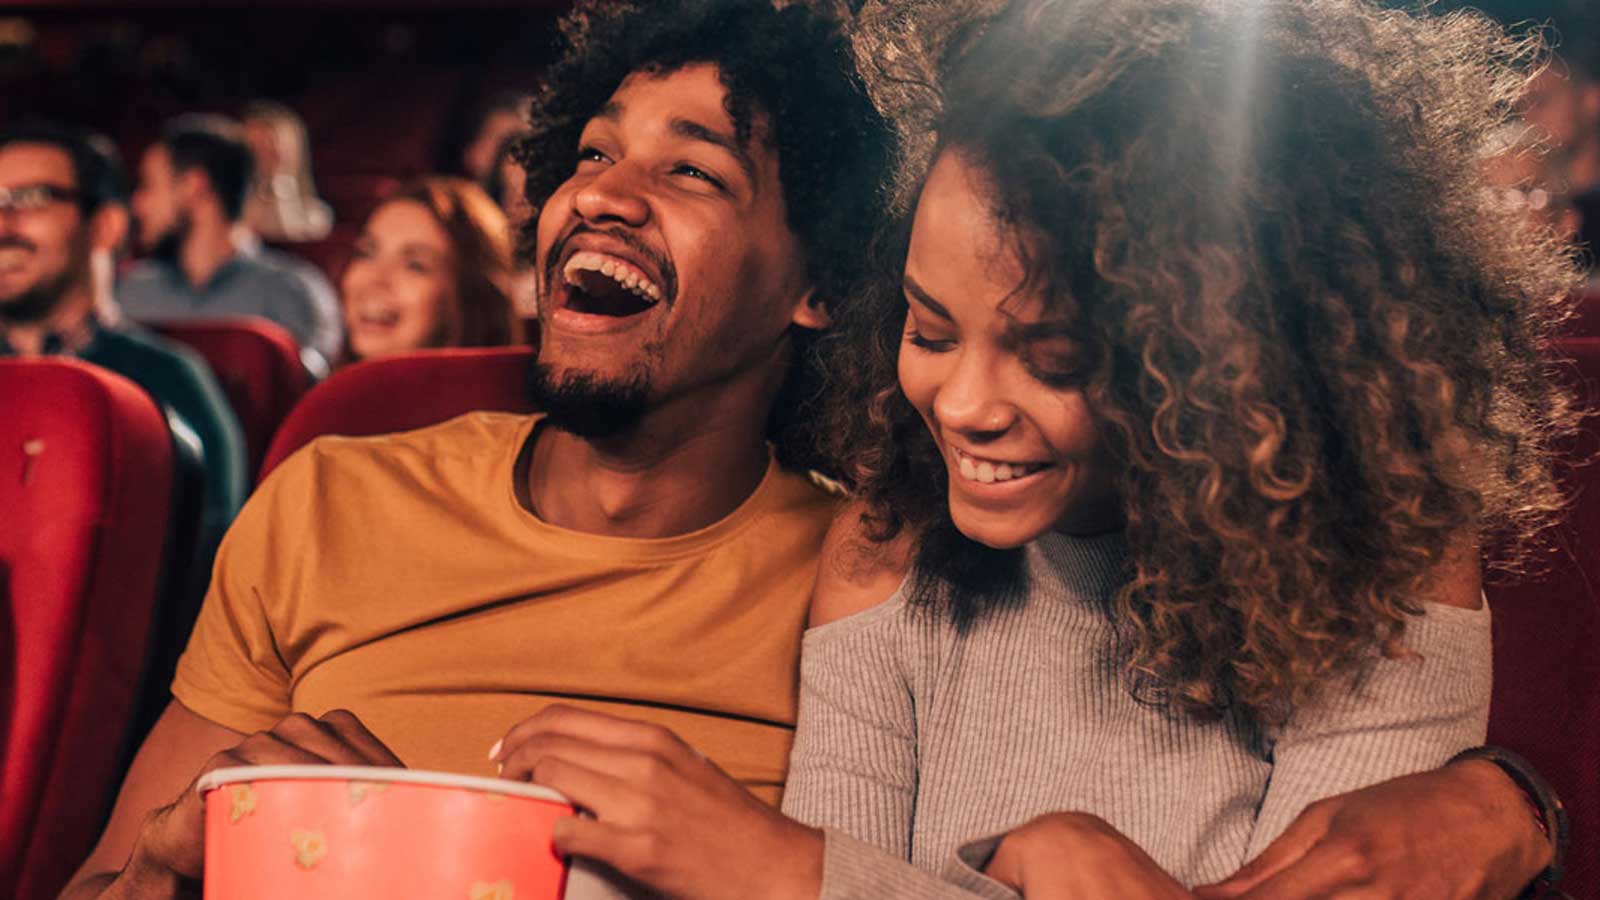 Couple laughing together at the movies.